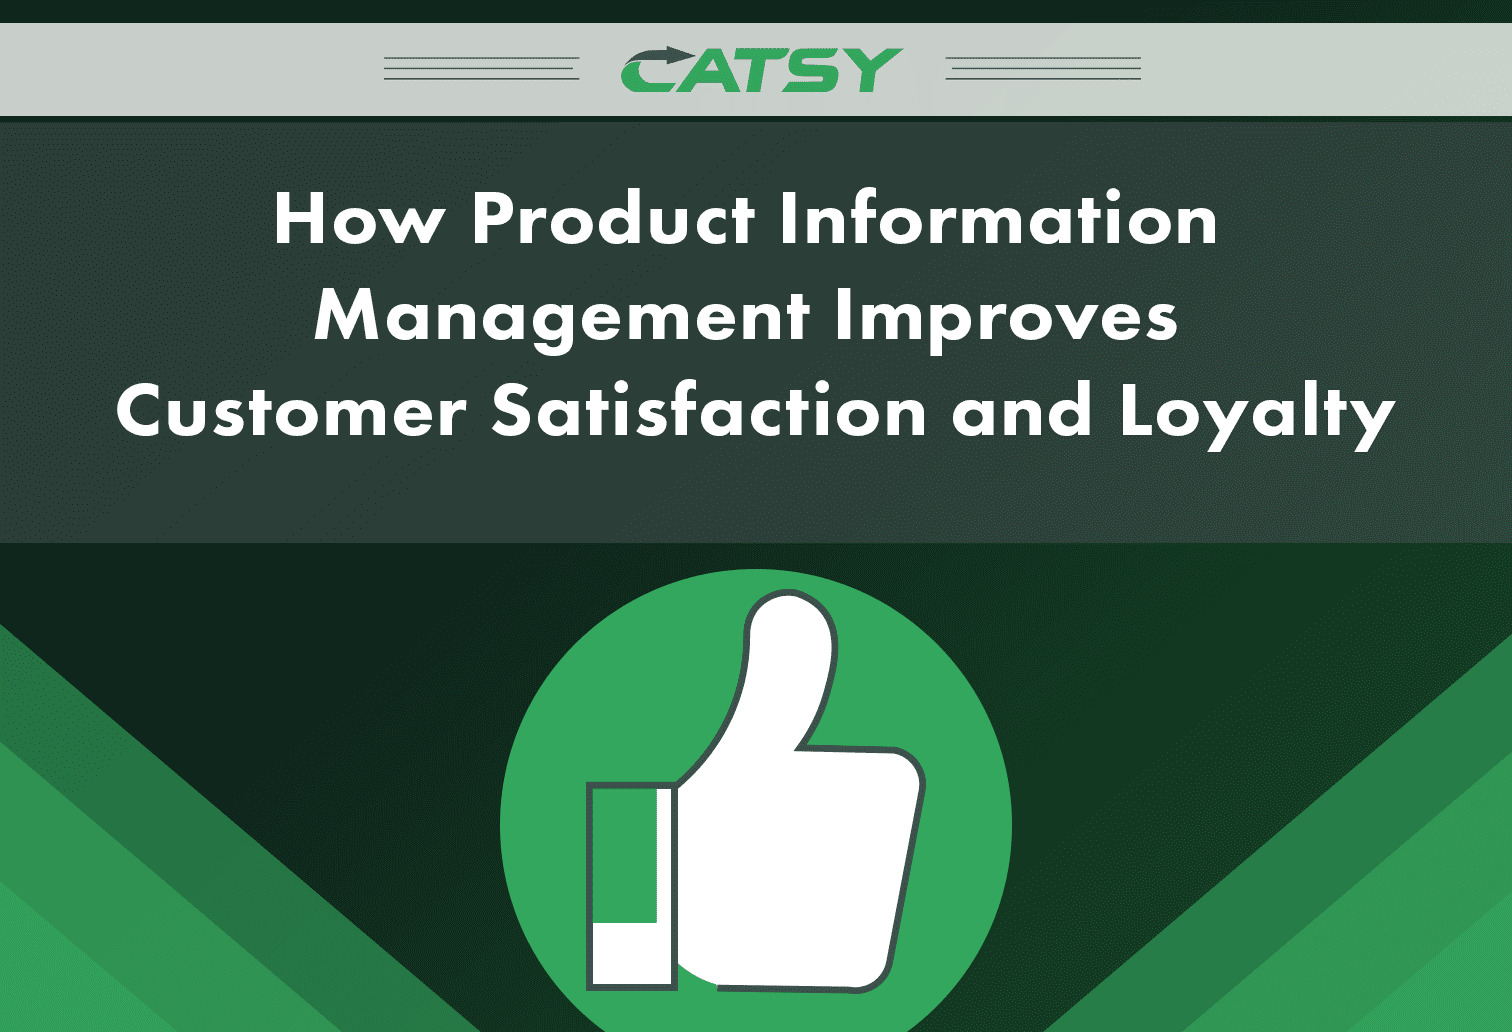 How Product Information Management Improves Customer Satisfaction and Loyalty